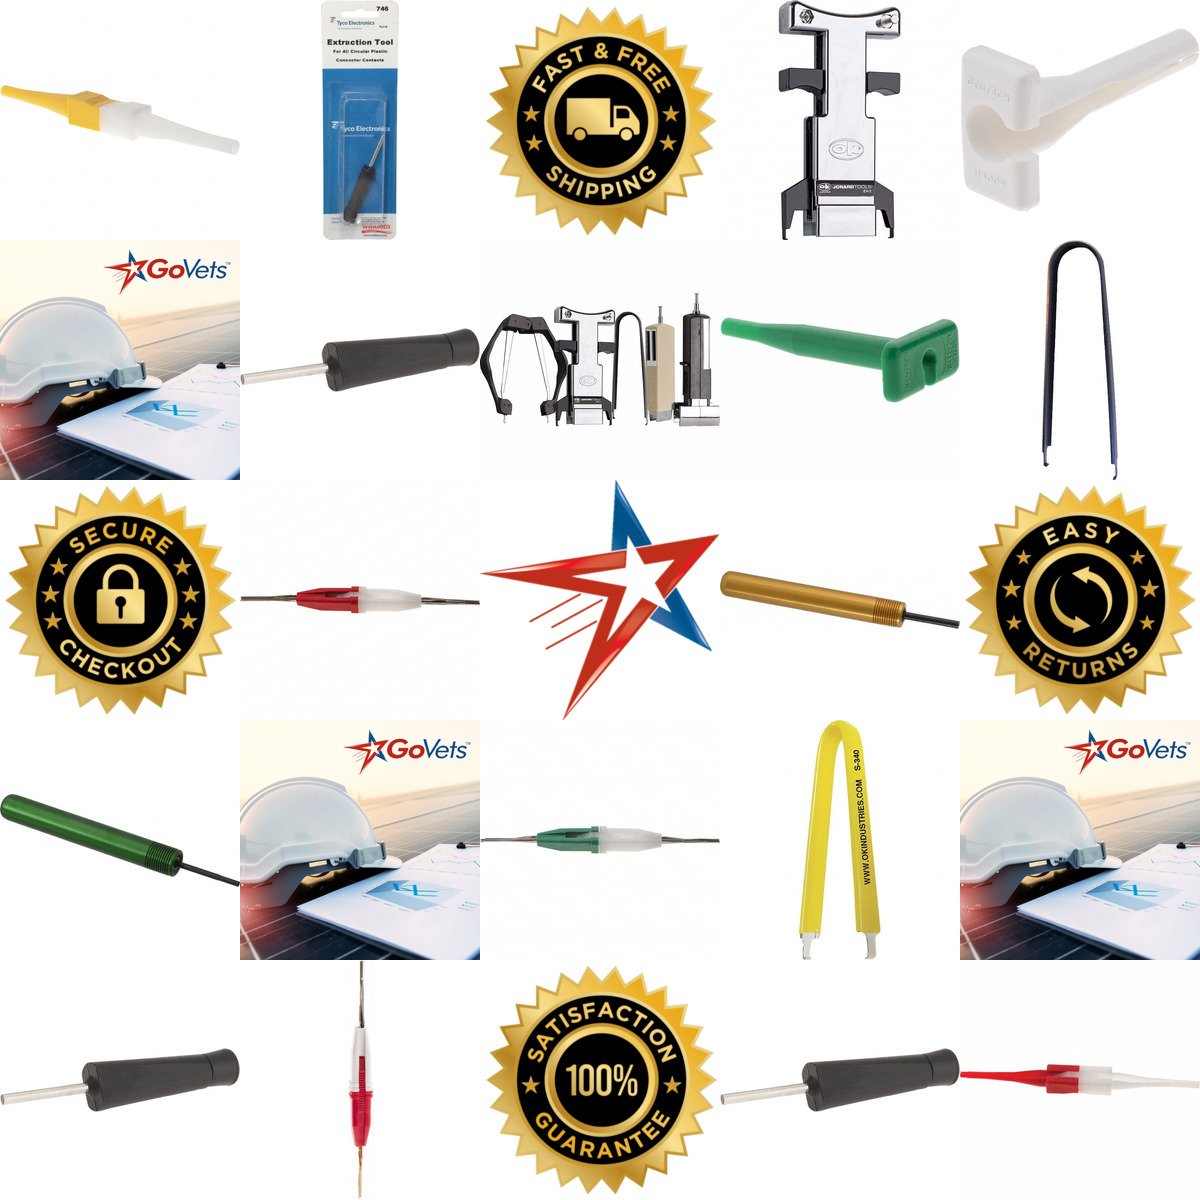 A selection of Pin Extraction Tools products on GoVets